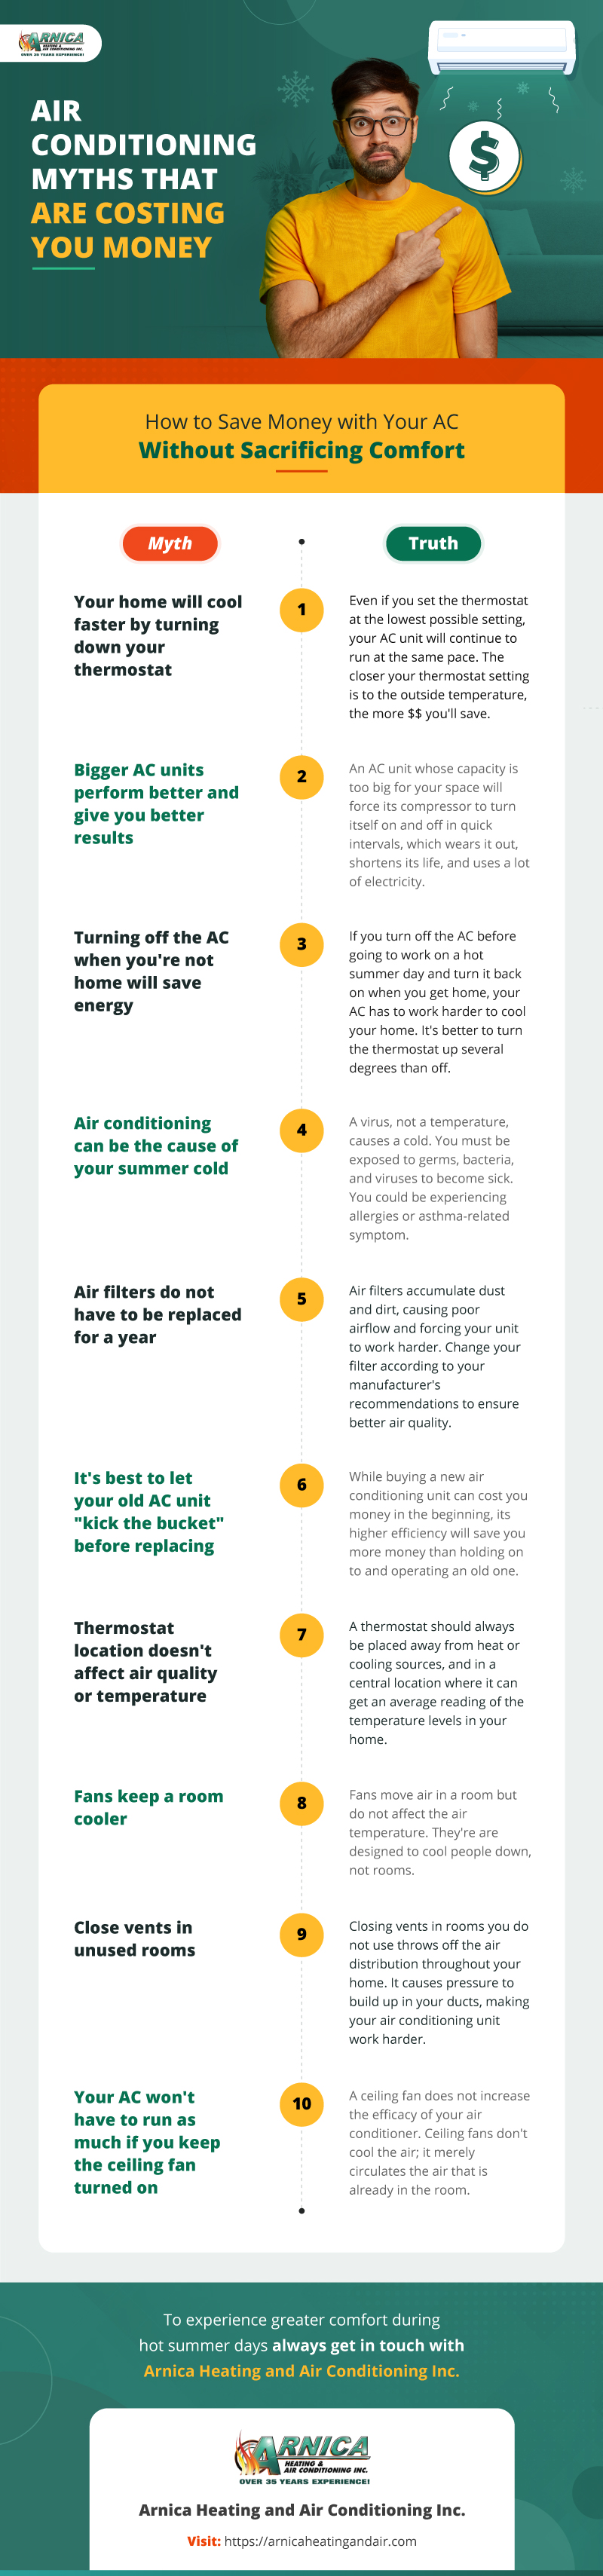 Air Conditioning Myths and Truth Infographic